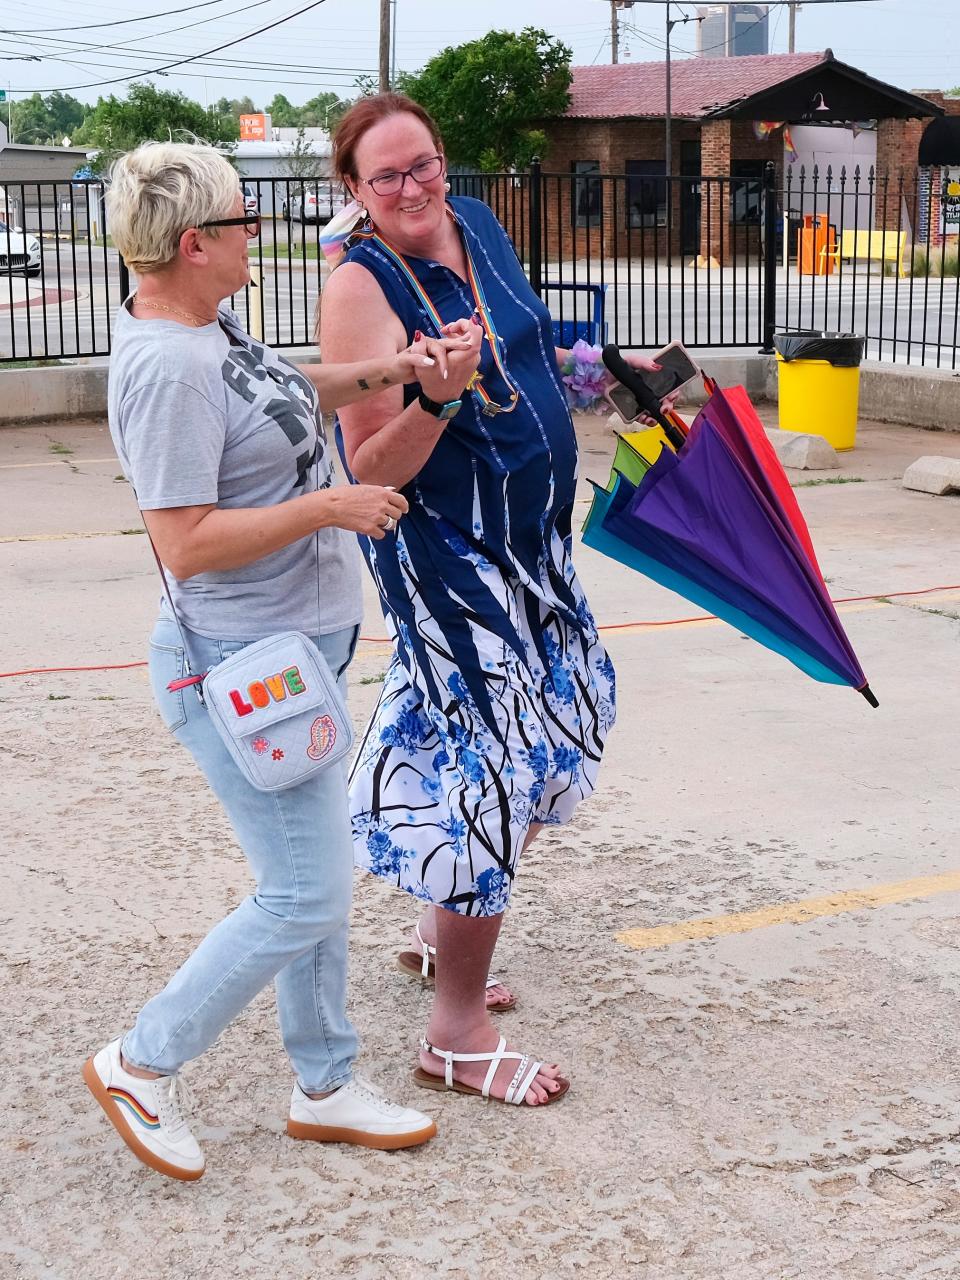 Sara Cunningham, founder of Free Mom Hugs, left, dances with Diana Lettkeman at the OKC Pride opening ceremony in May 2023 in Oklahoma City.